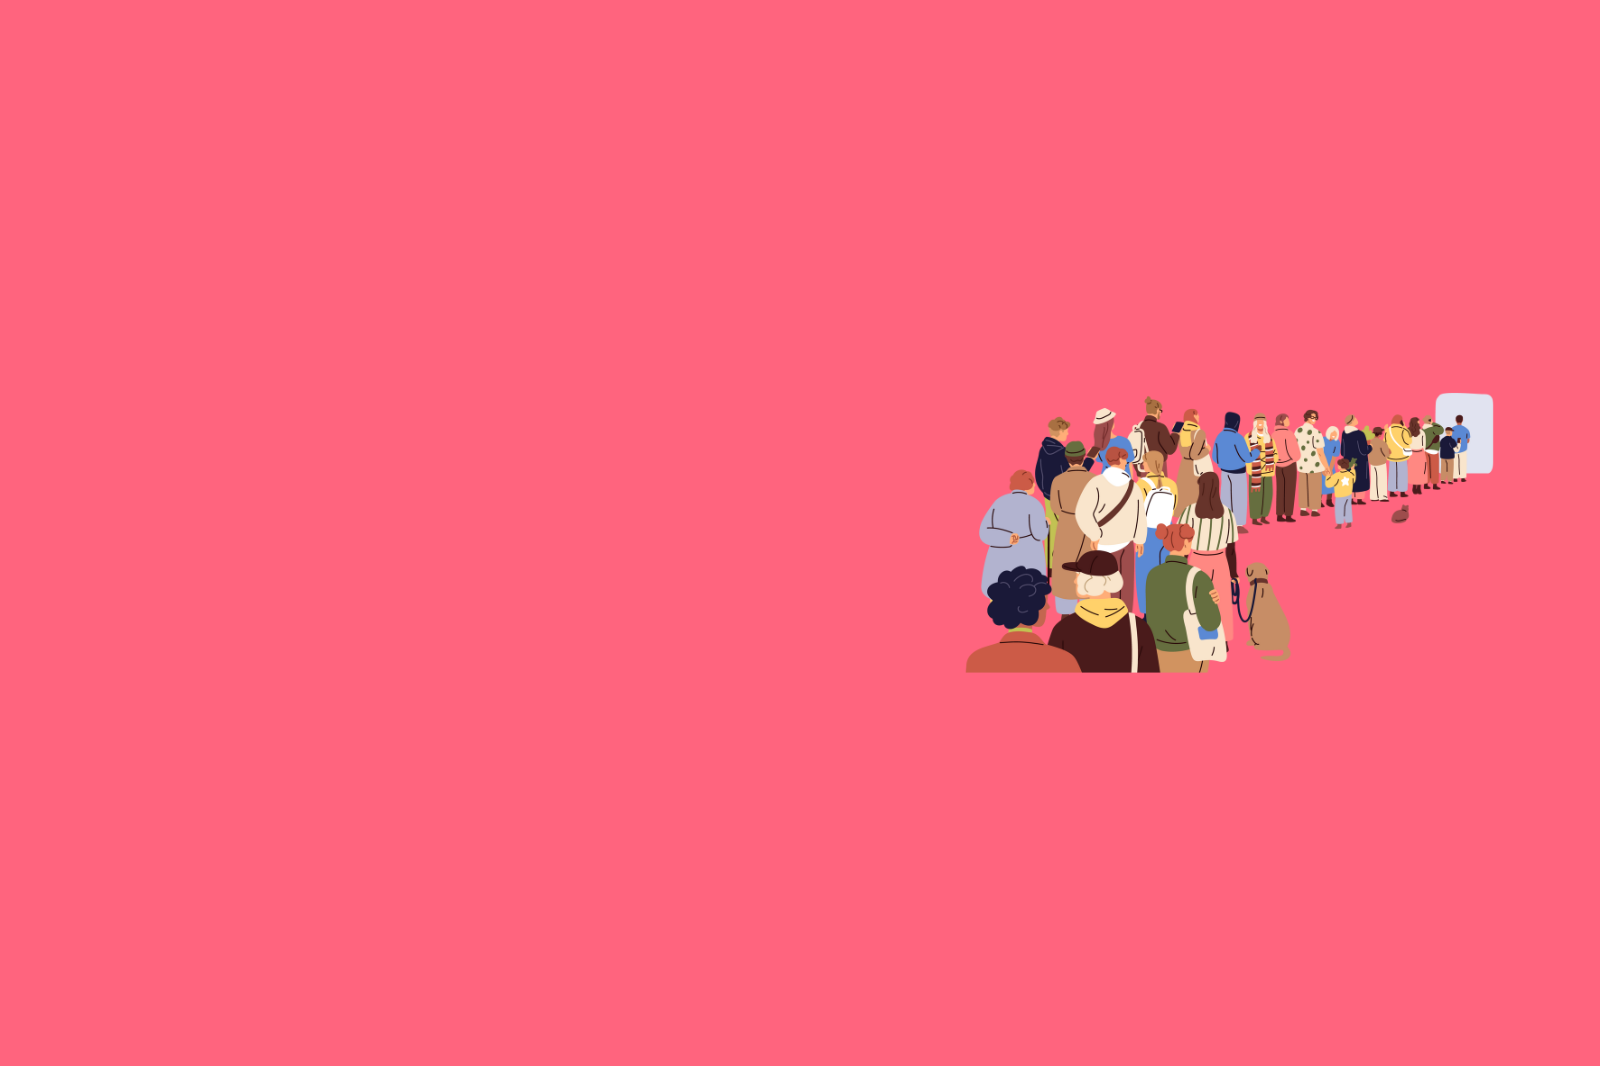 Keywords: Group, standing.

Modified Description: A group of people standing on a pink background, utilizing different targeting approaches to drive footfall.